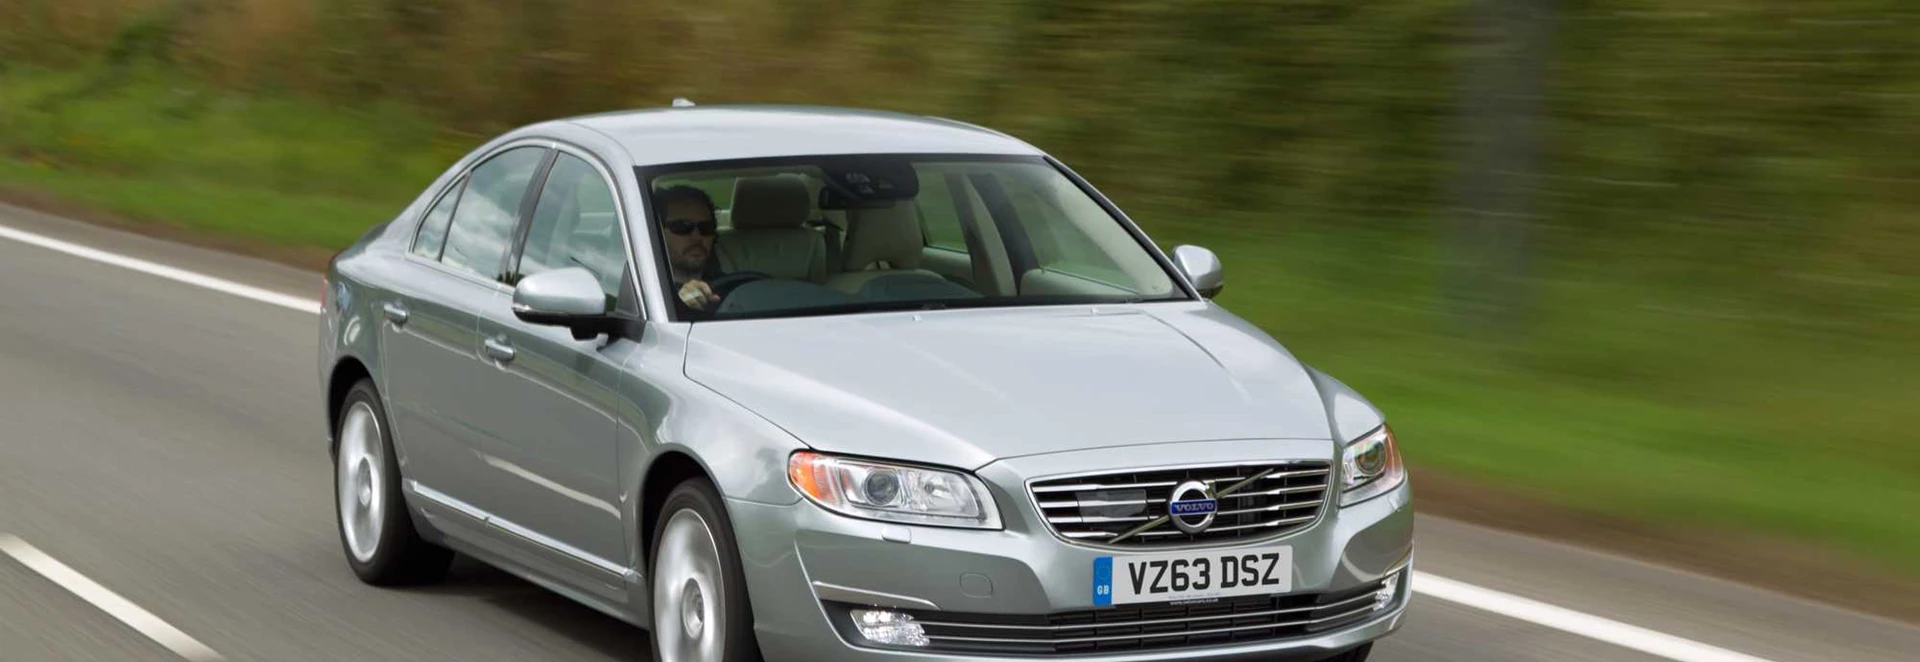 Volvo S80 saloon review 